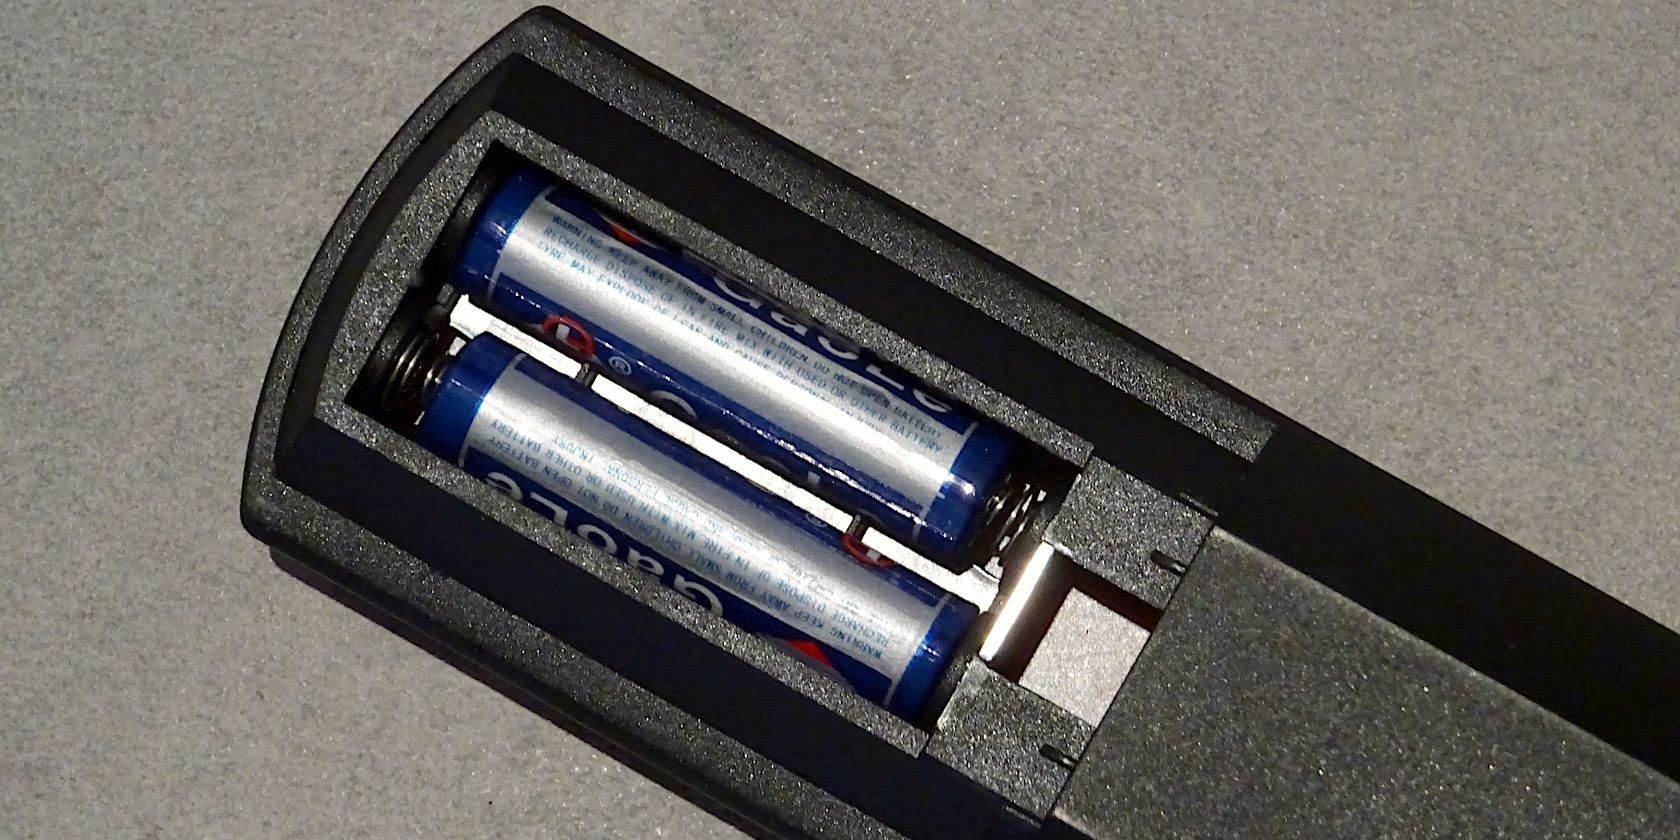 Remote control battery compartment containing two 1.5 batteries in series